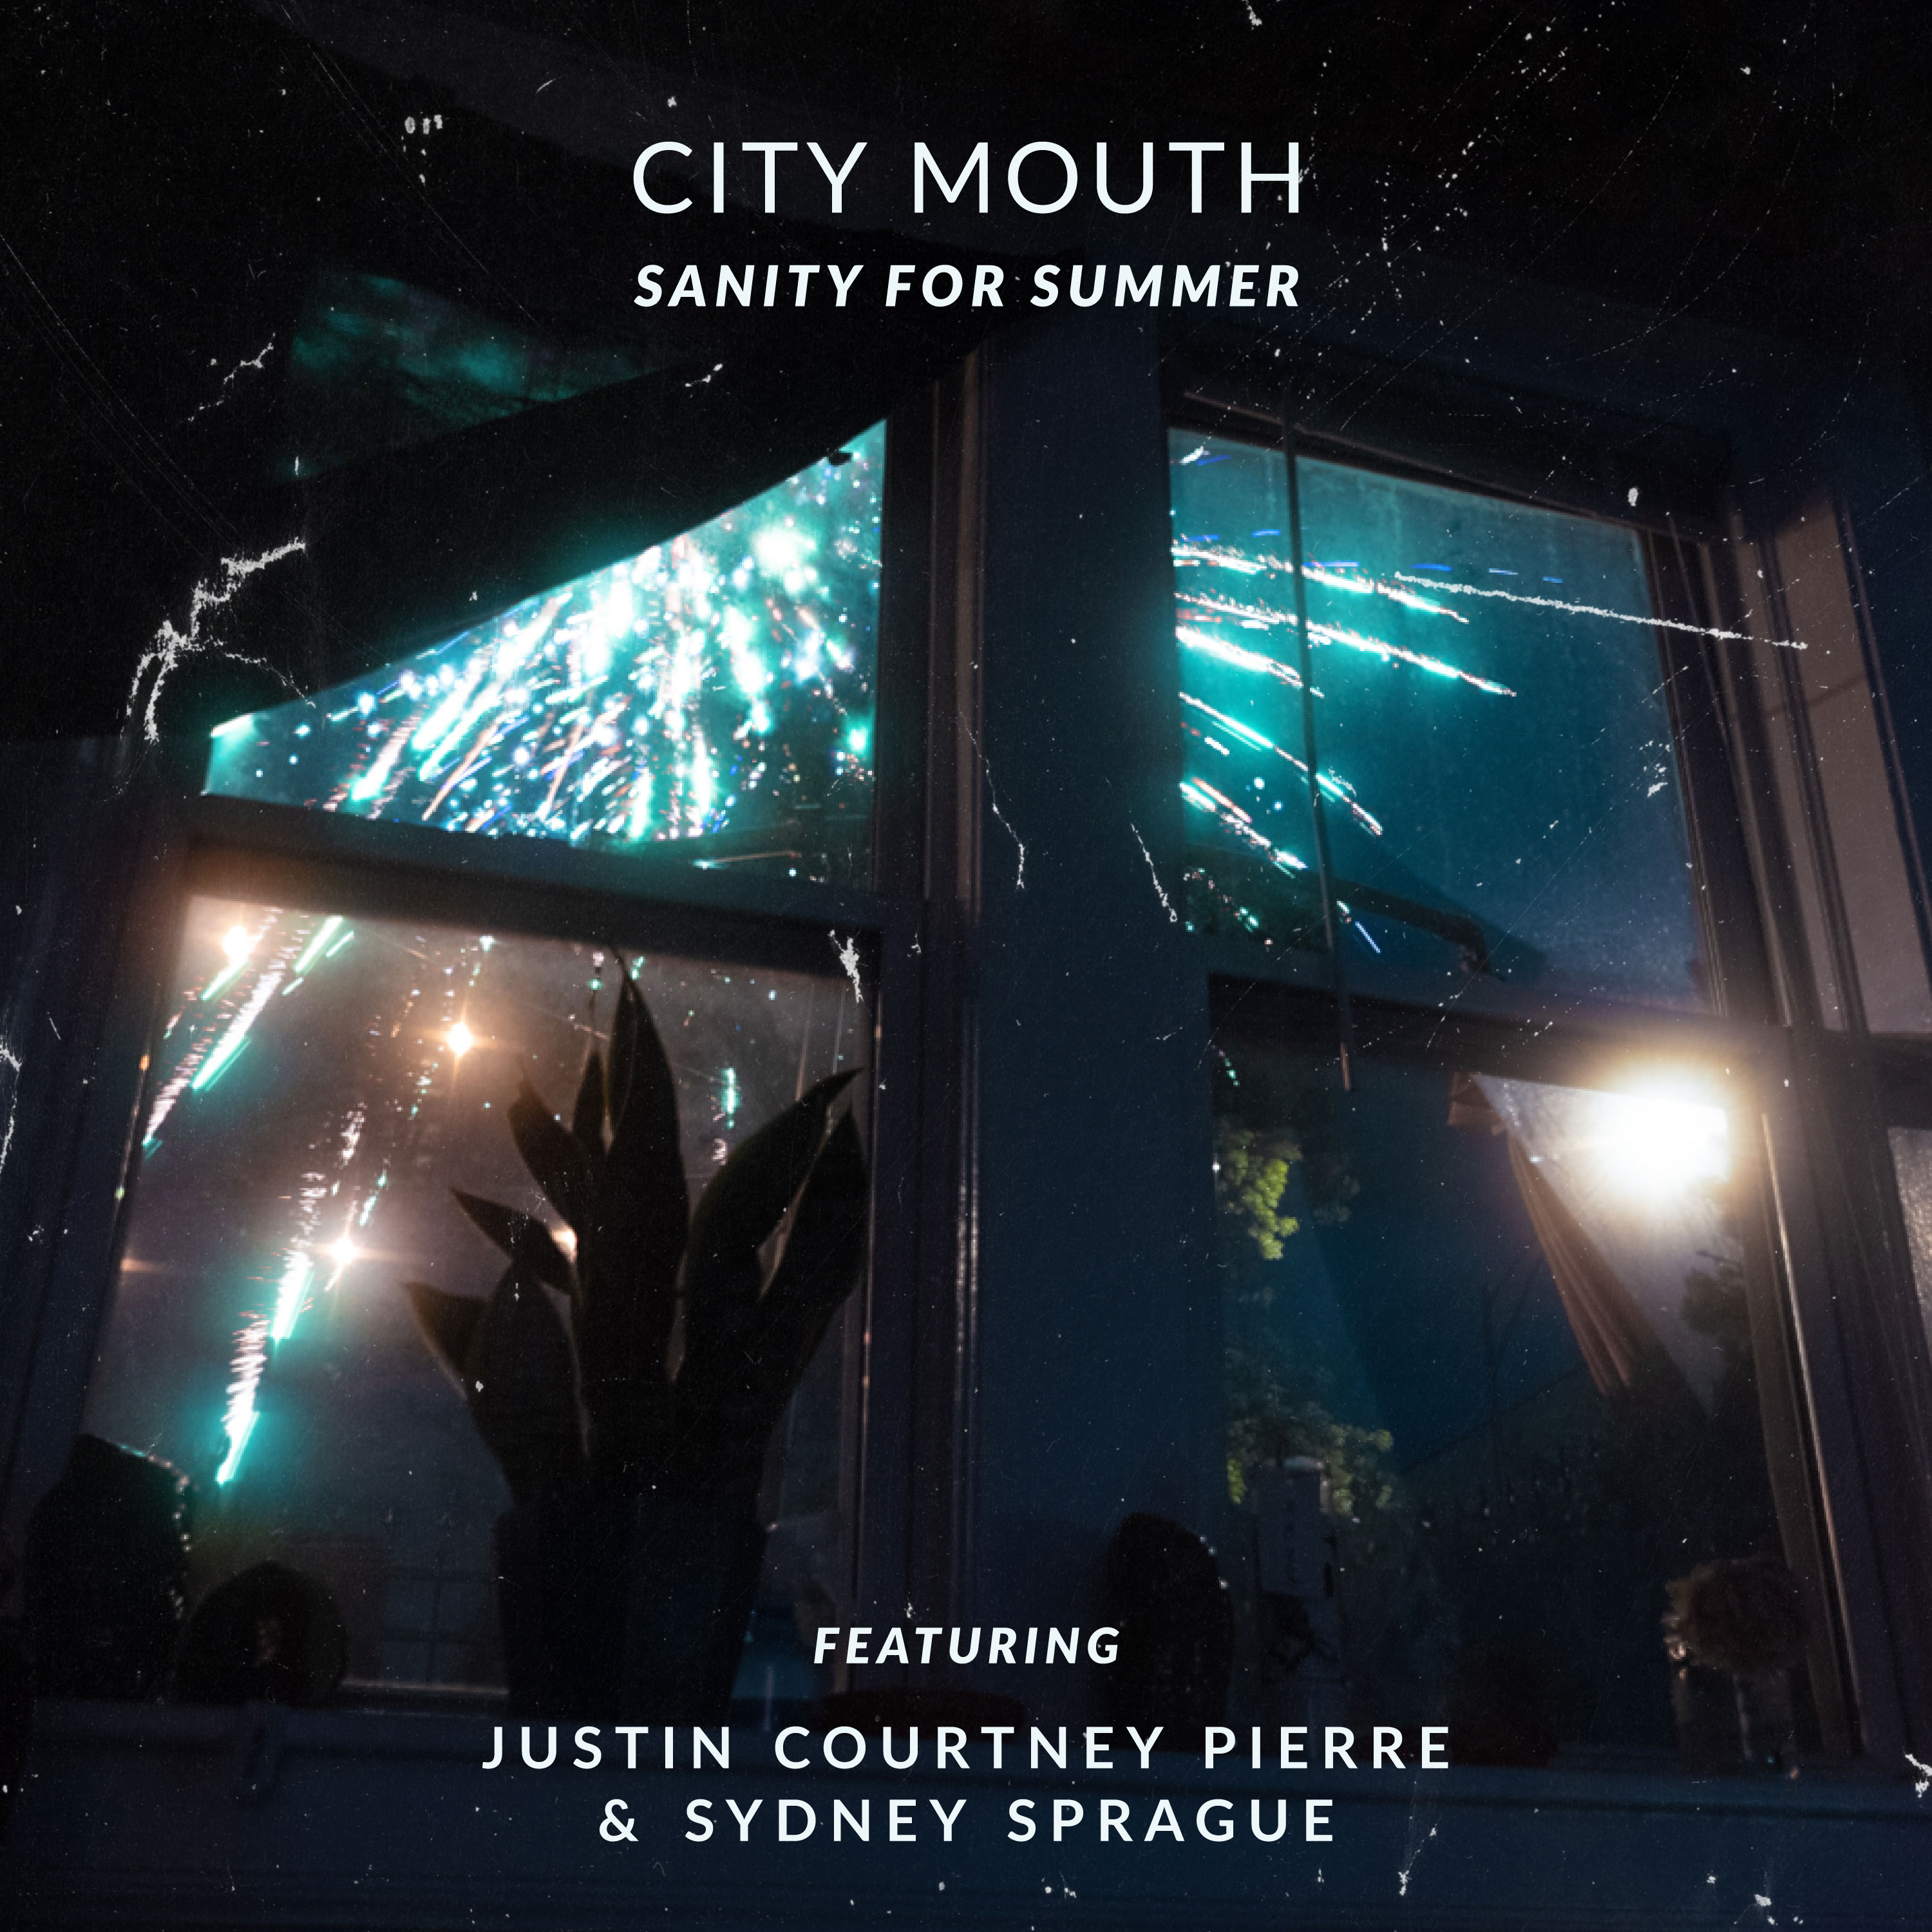 View of colored fireworks from the inside of a house window at night. Plants sit on the windowsill inside. Text in the image frame reads, "City Mouth, Sanity for Summer; Featuring Justin Courtney Pierre; Sydney Sprague